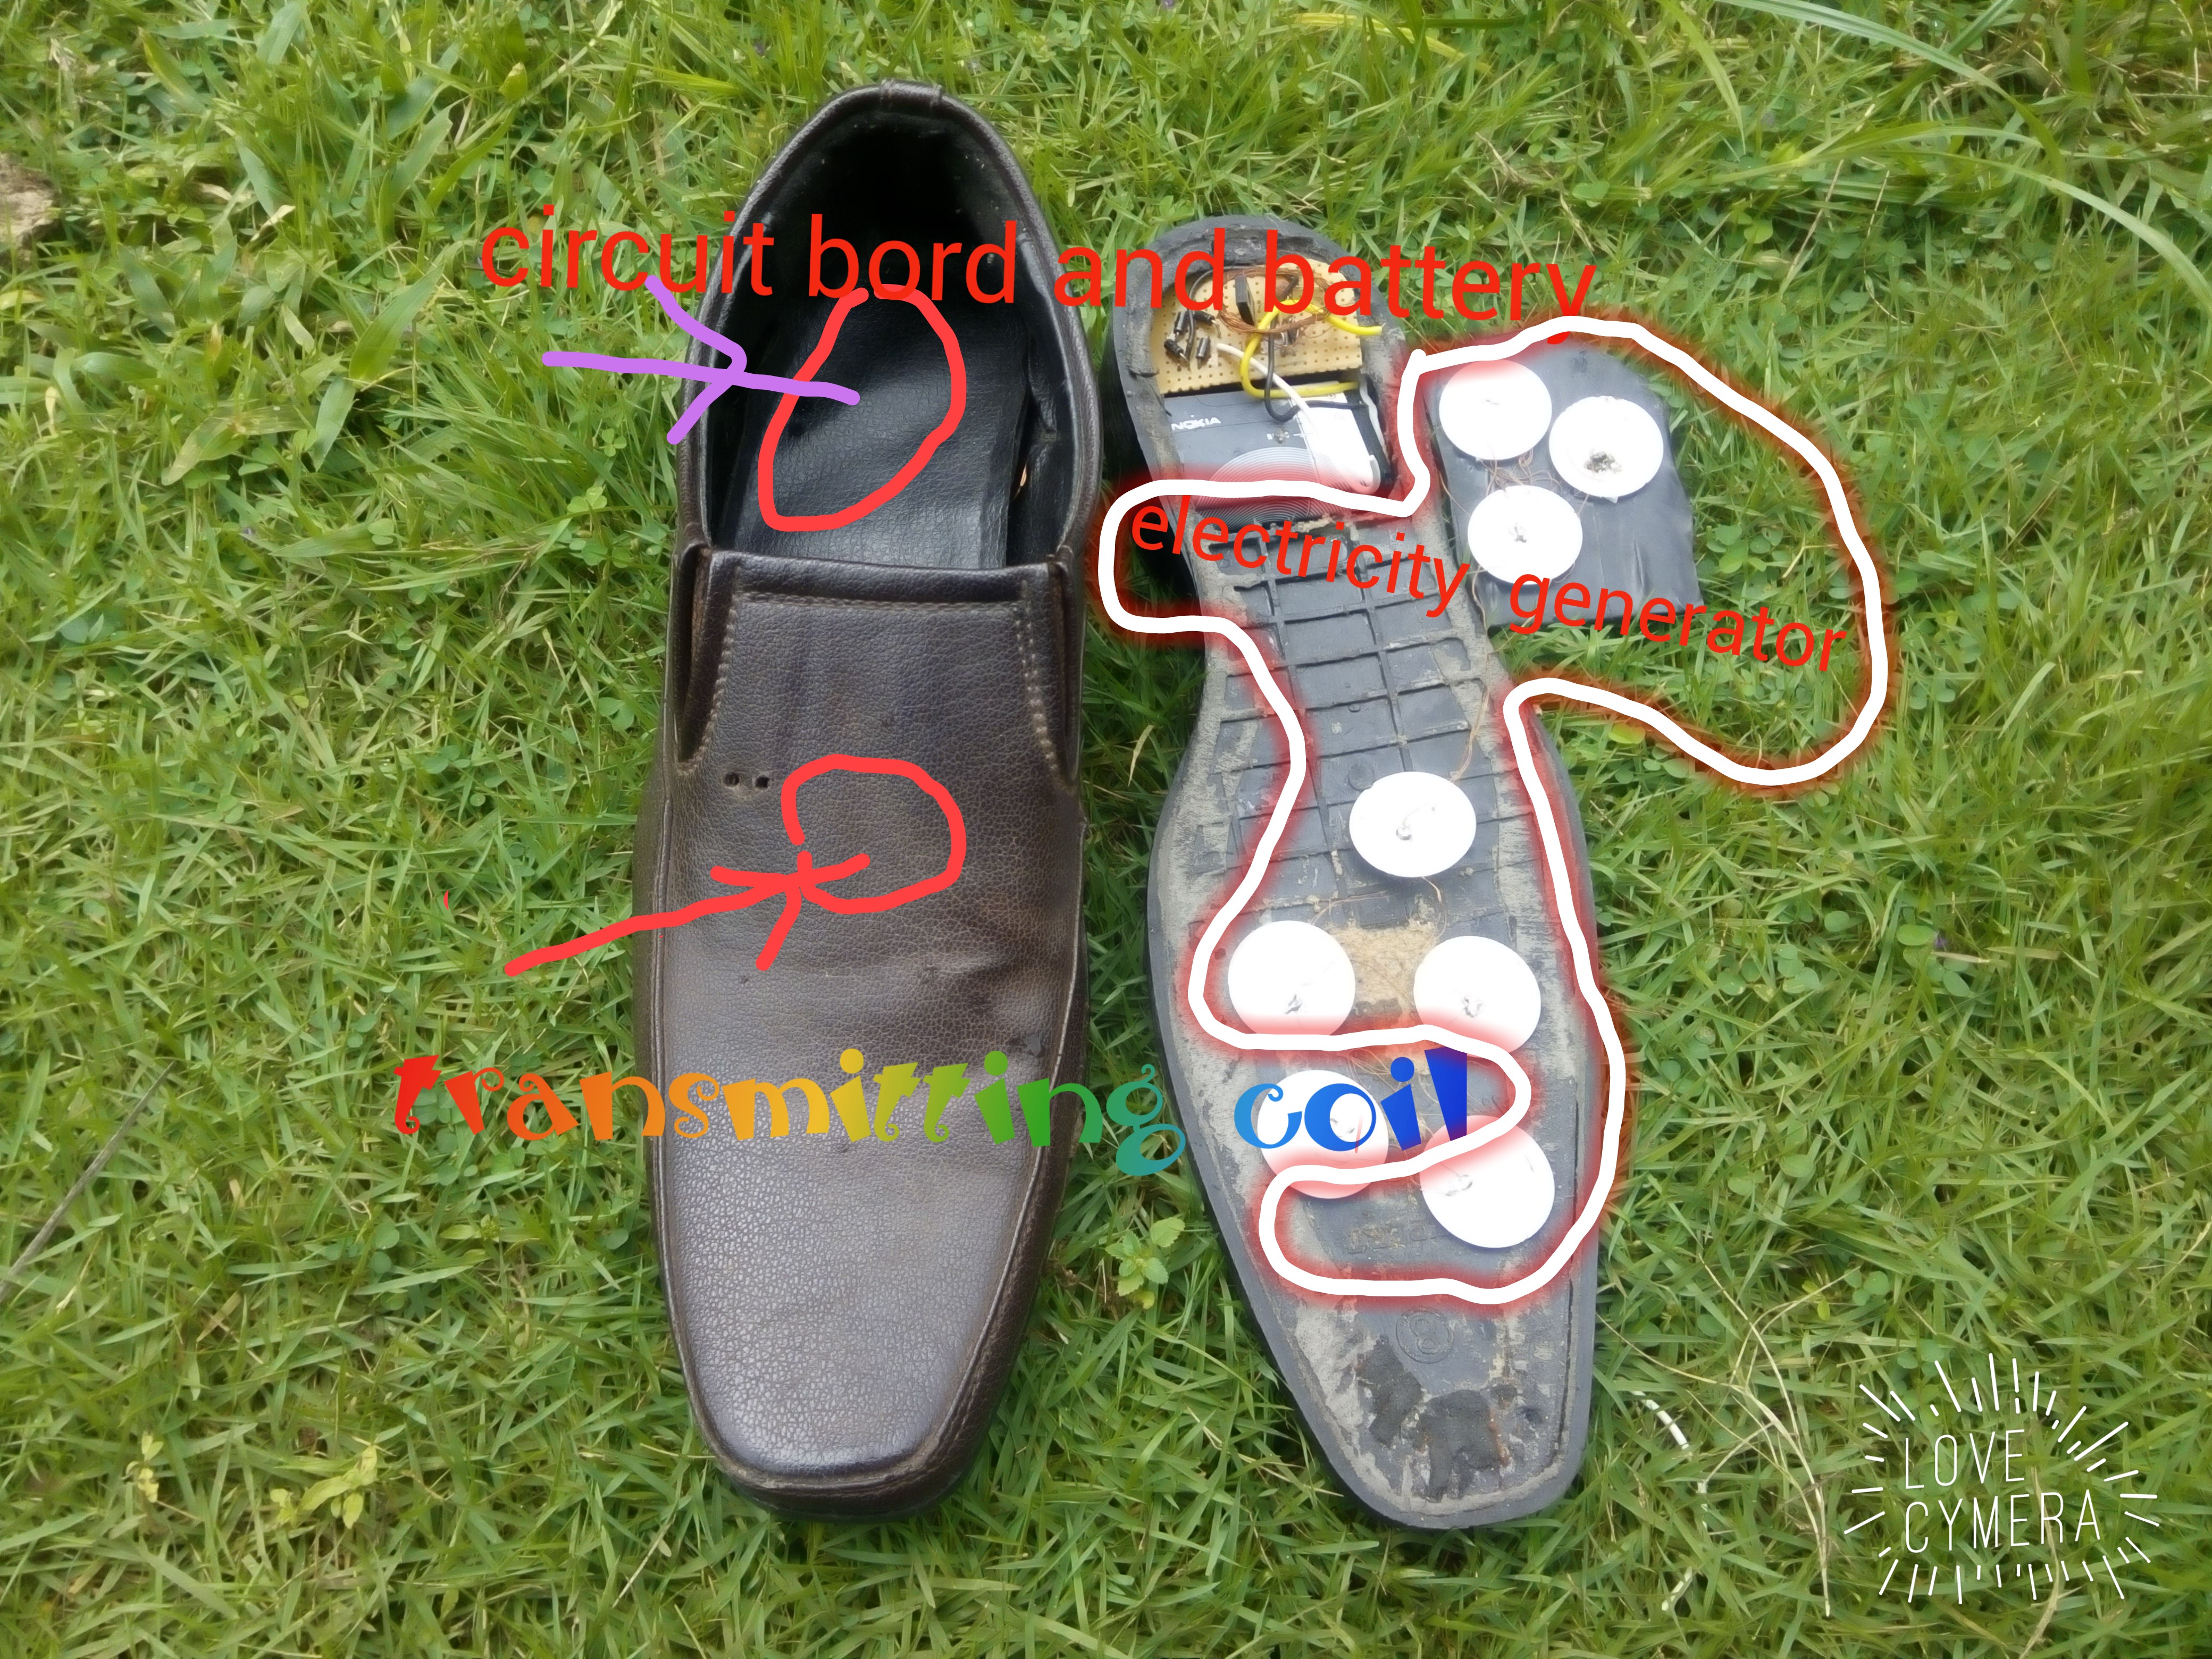 SMART SHOE (electricity generating shoe with wireless charger) - The IEEE  Maker Project